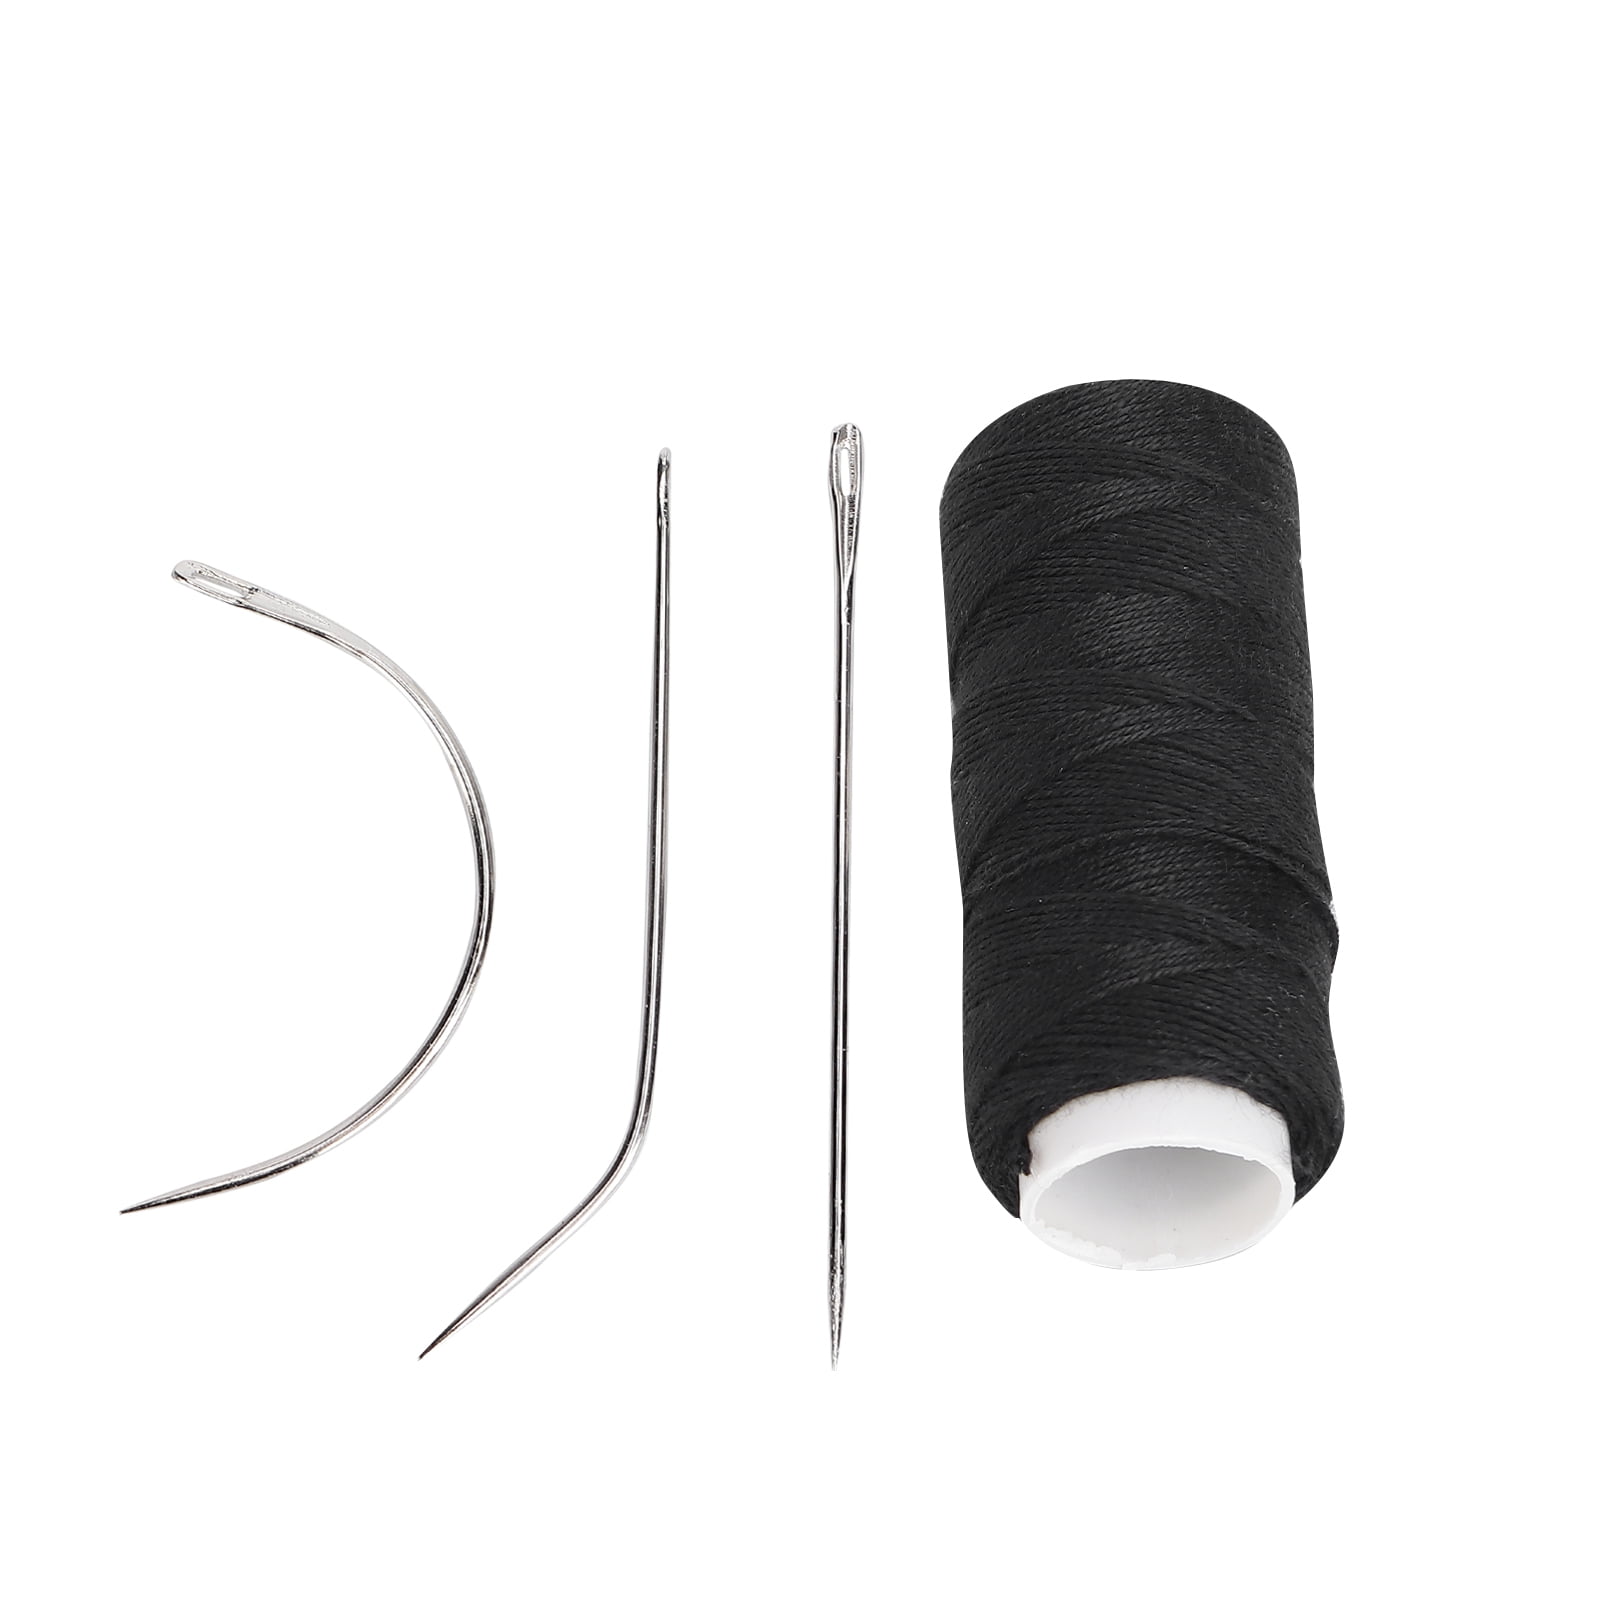 EOTVIA Weaving Needle Combo Deal Black Thread with 3pcs Needle for Making Sewing  Hair Weft Hair Weave Extension, C J Shape Curved Needle 